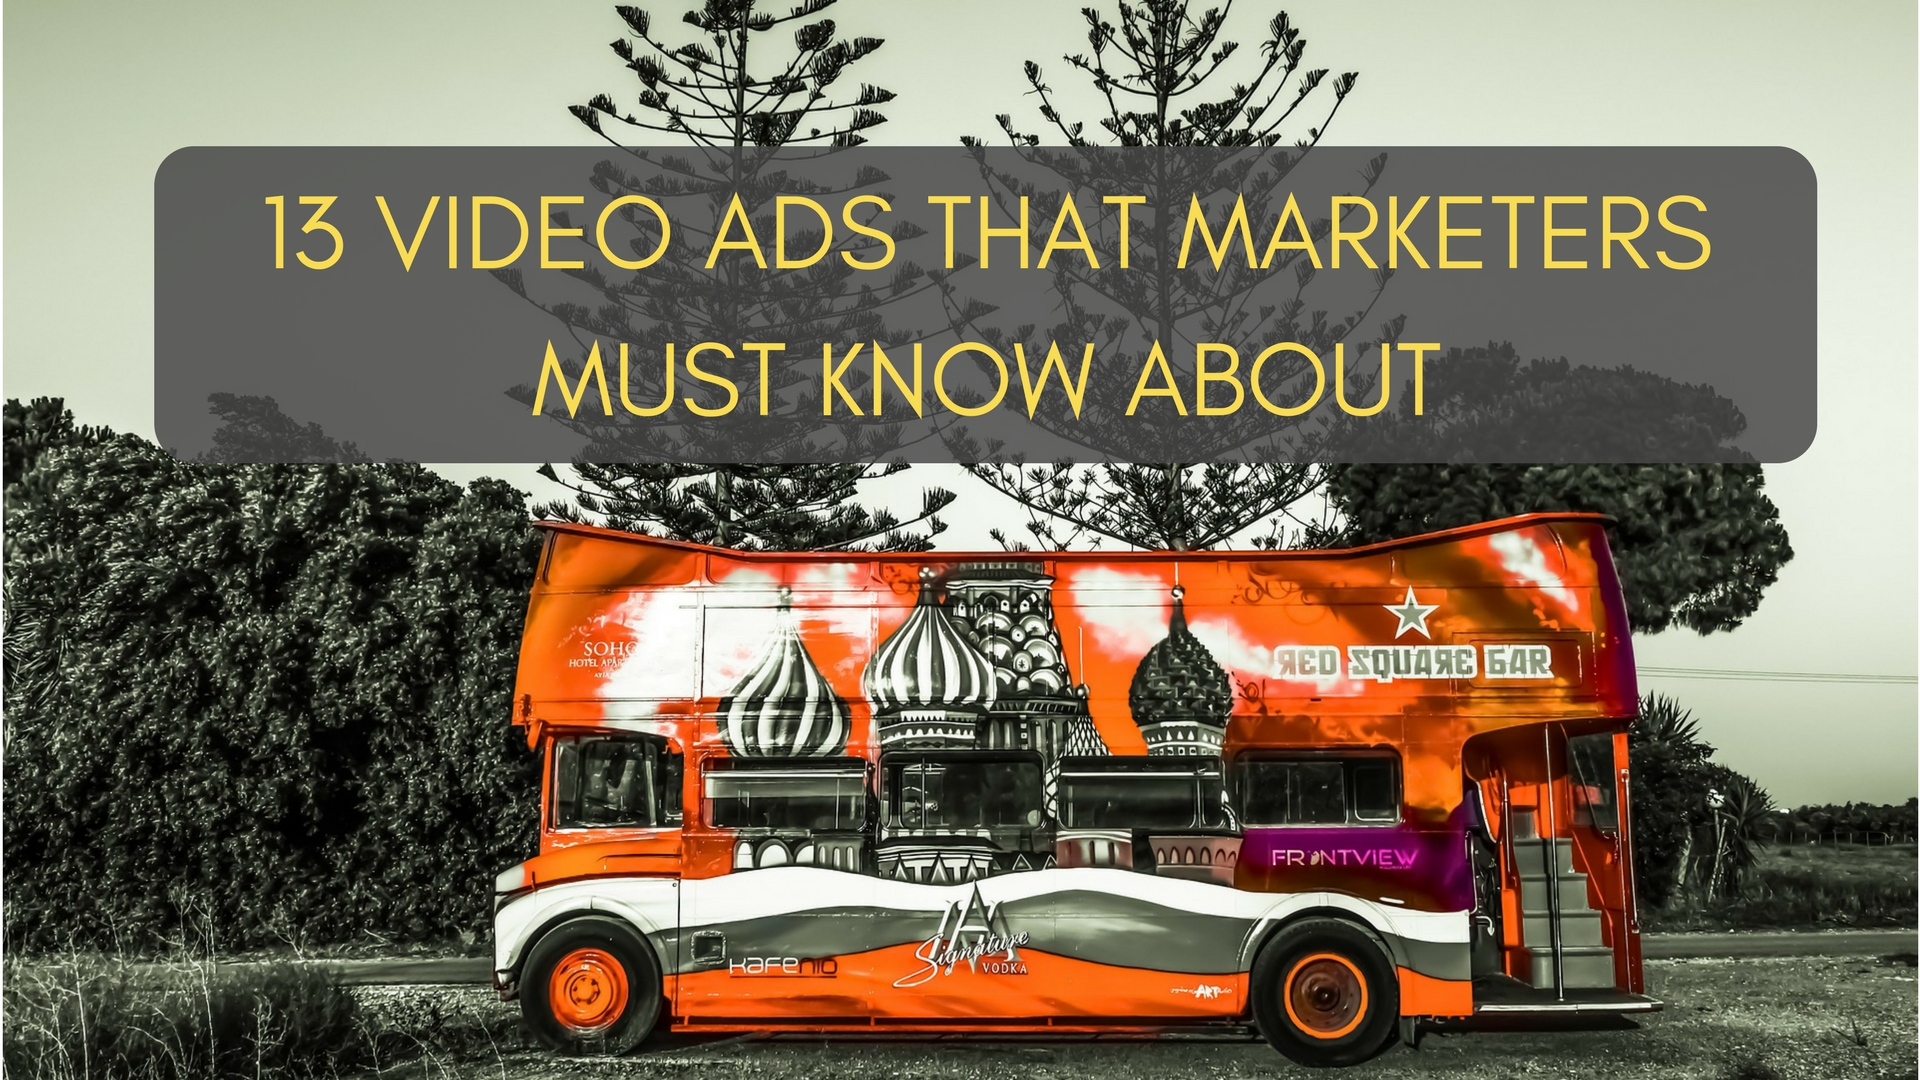 13 Video Ads that Marketers Must Know About